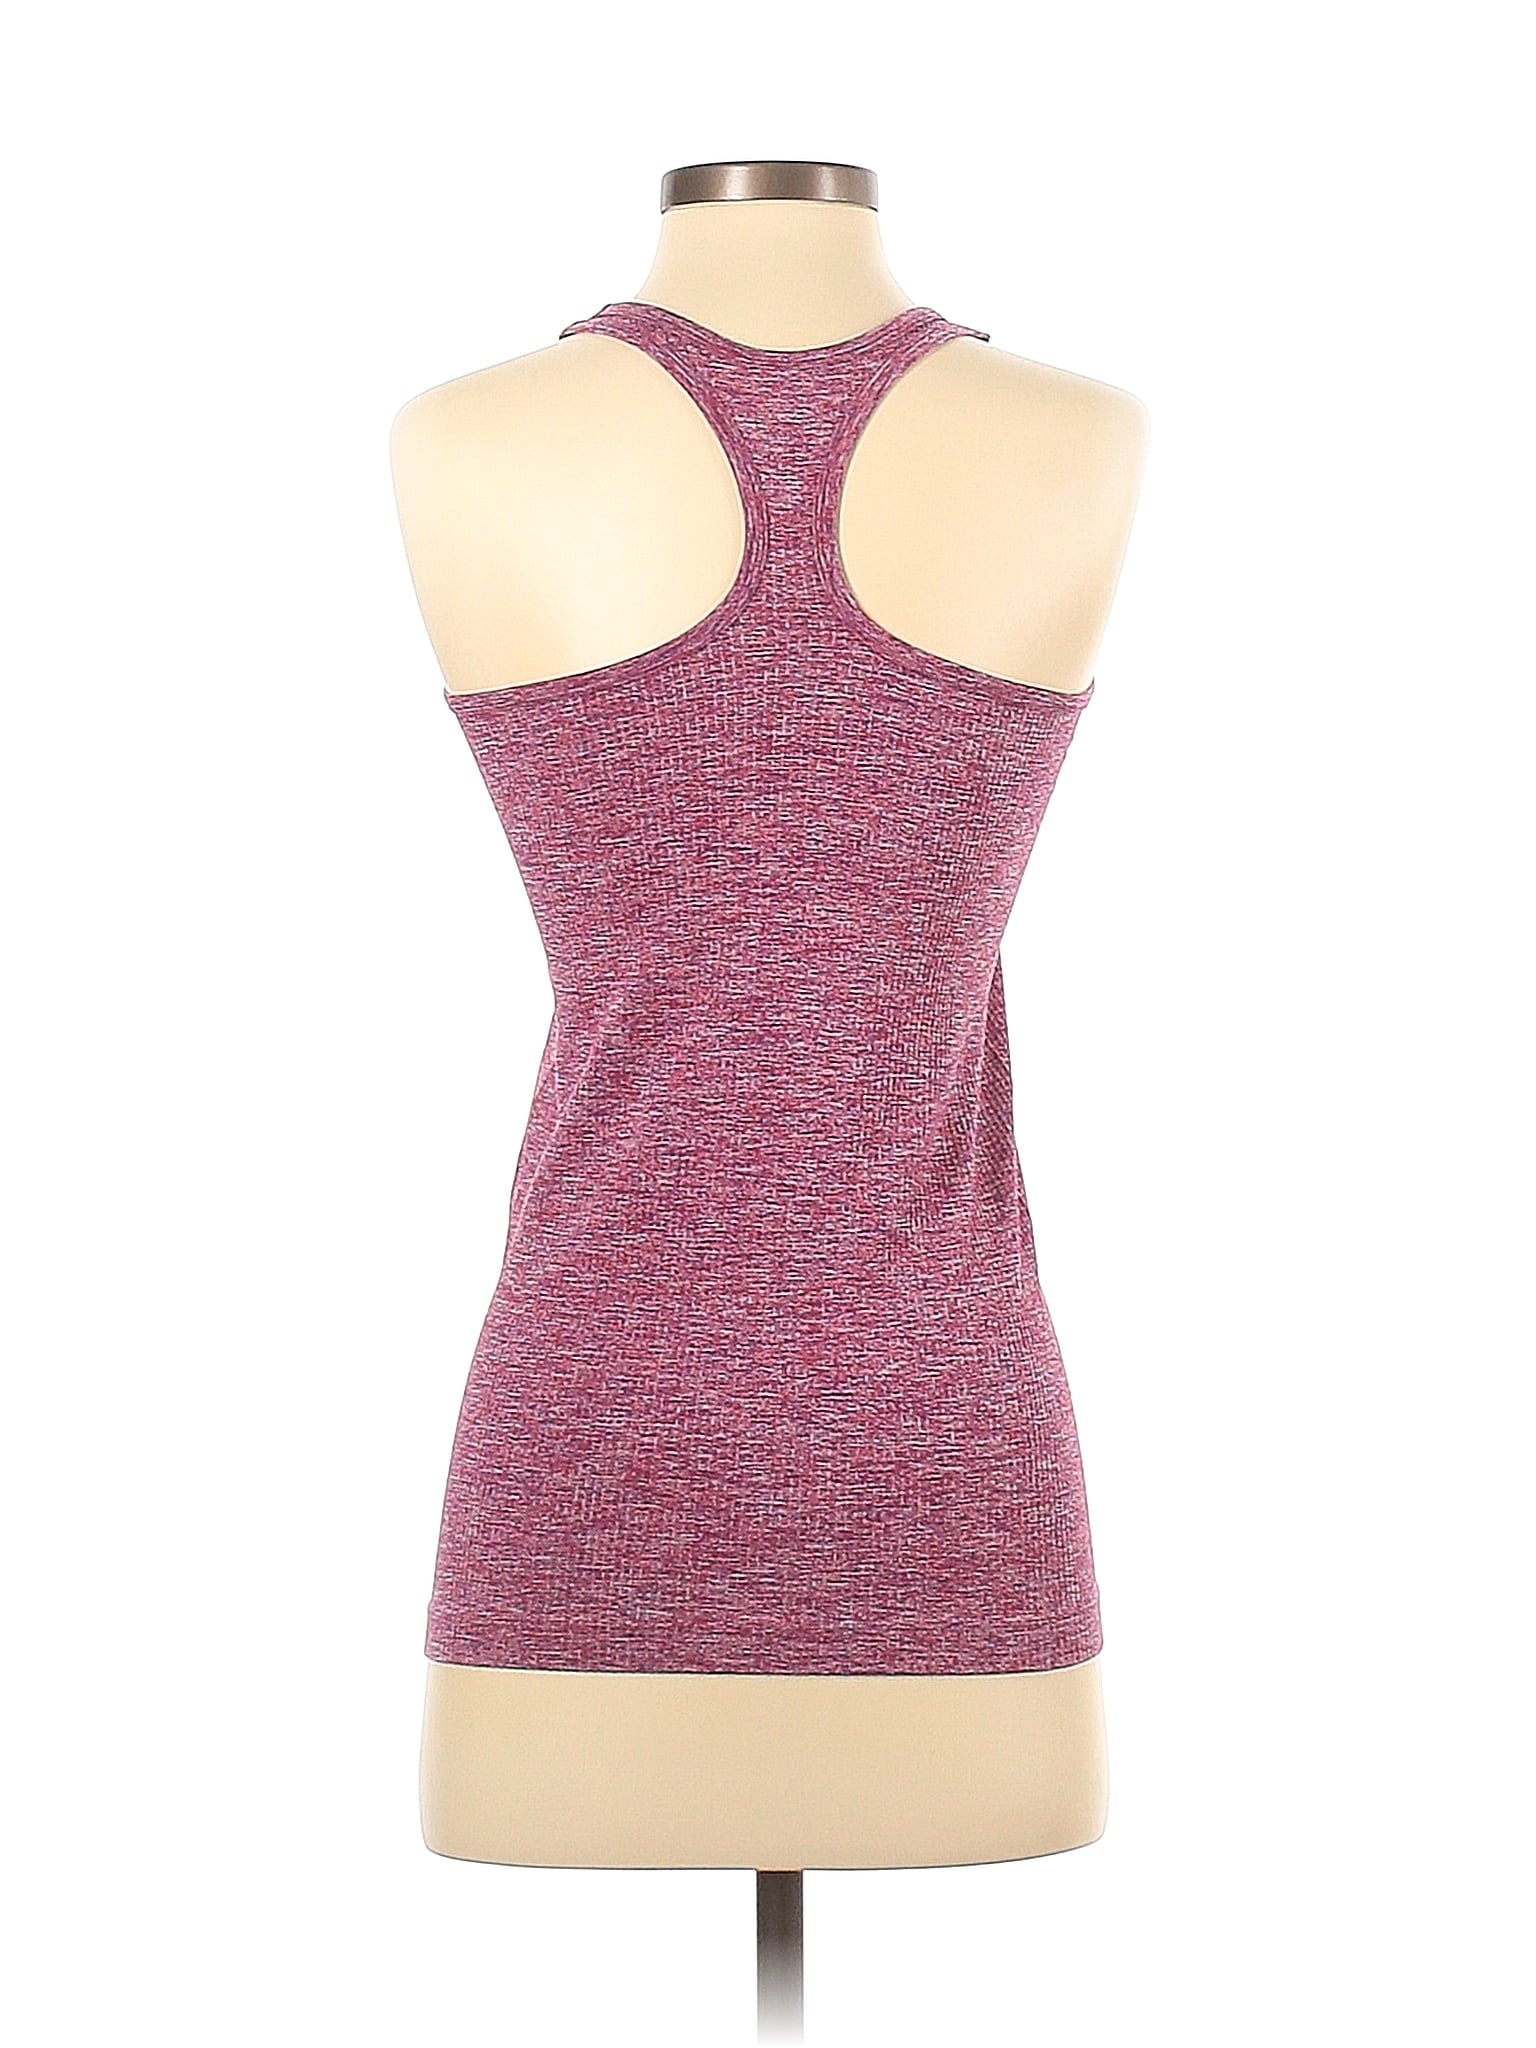 Tank Top size - S